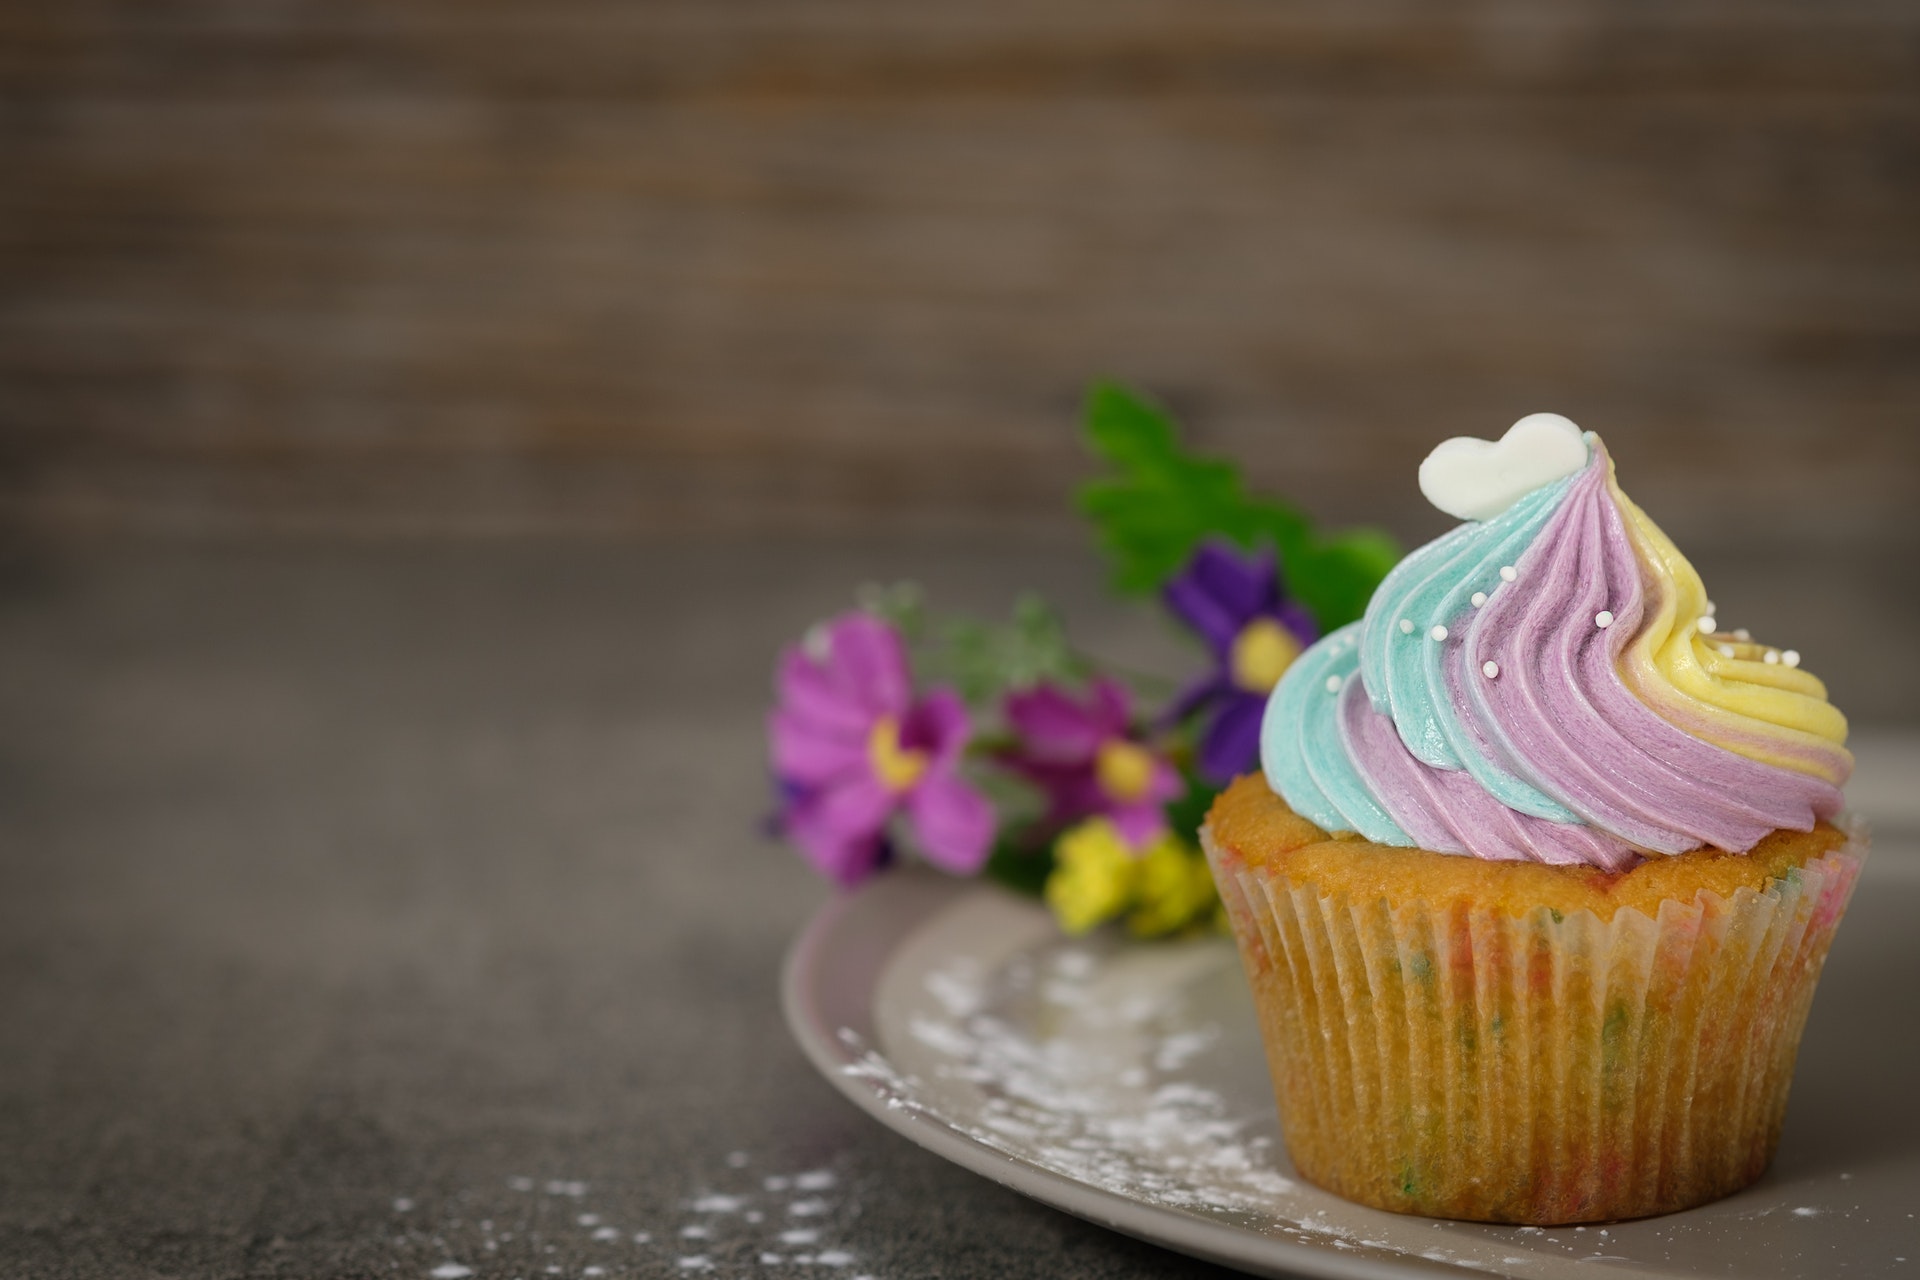 Cup Cake Photography - 1920x1280 Wallpaper 